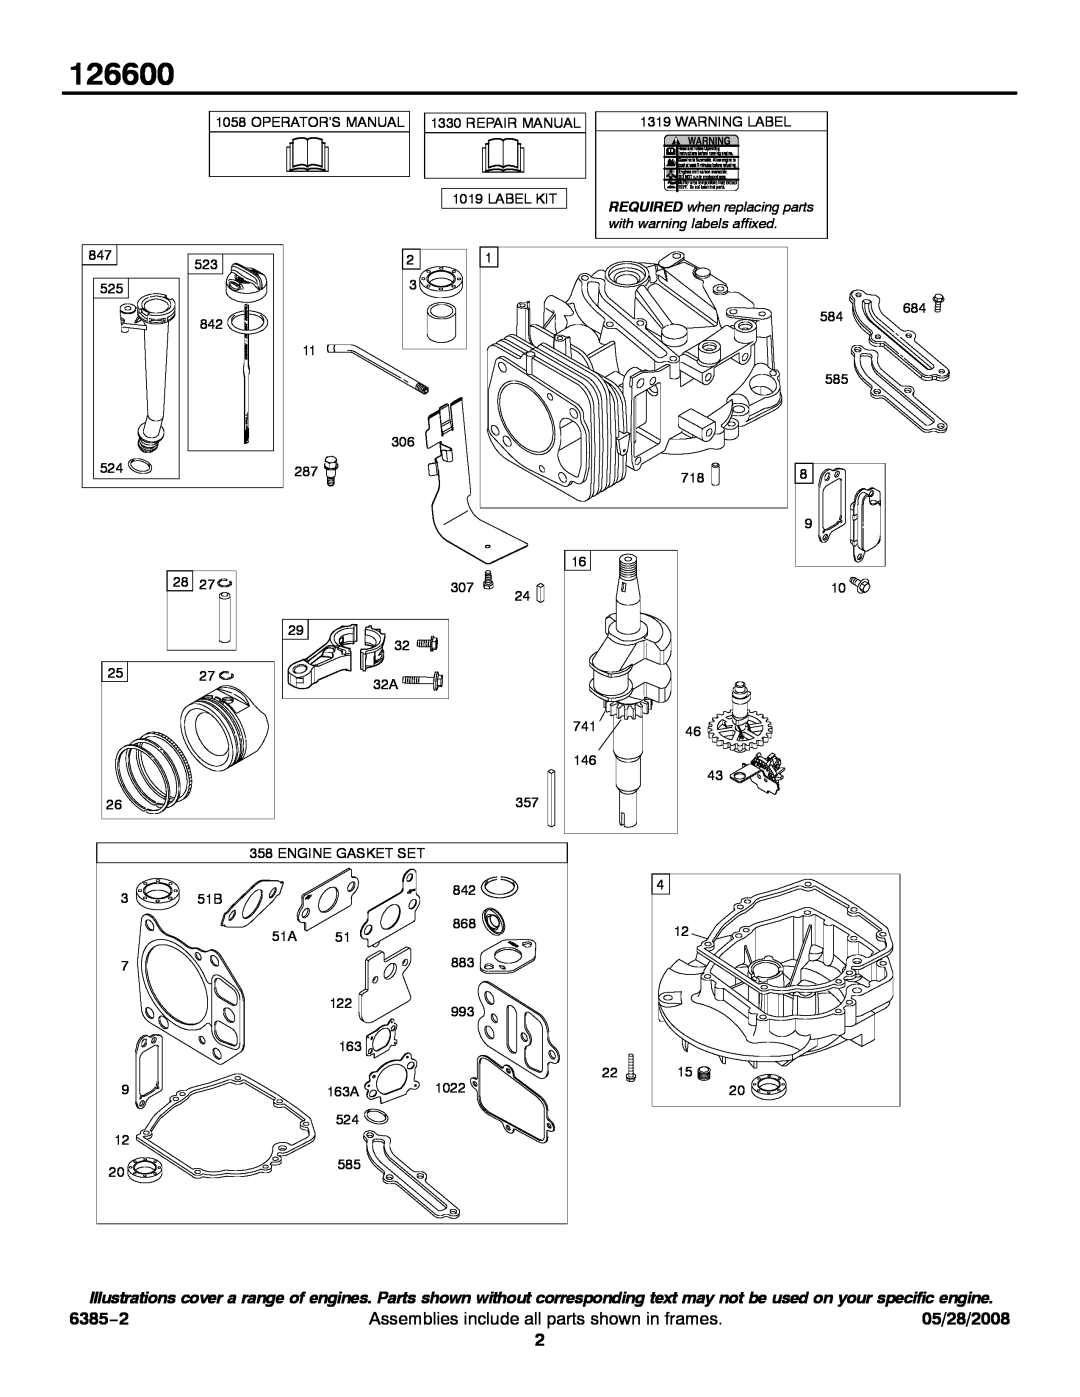 Briggs & Stratton 126600 service manual 6385−2, Assemblies include all parts shown in frames, 05/28/2008 